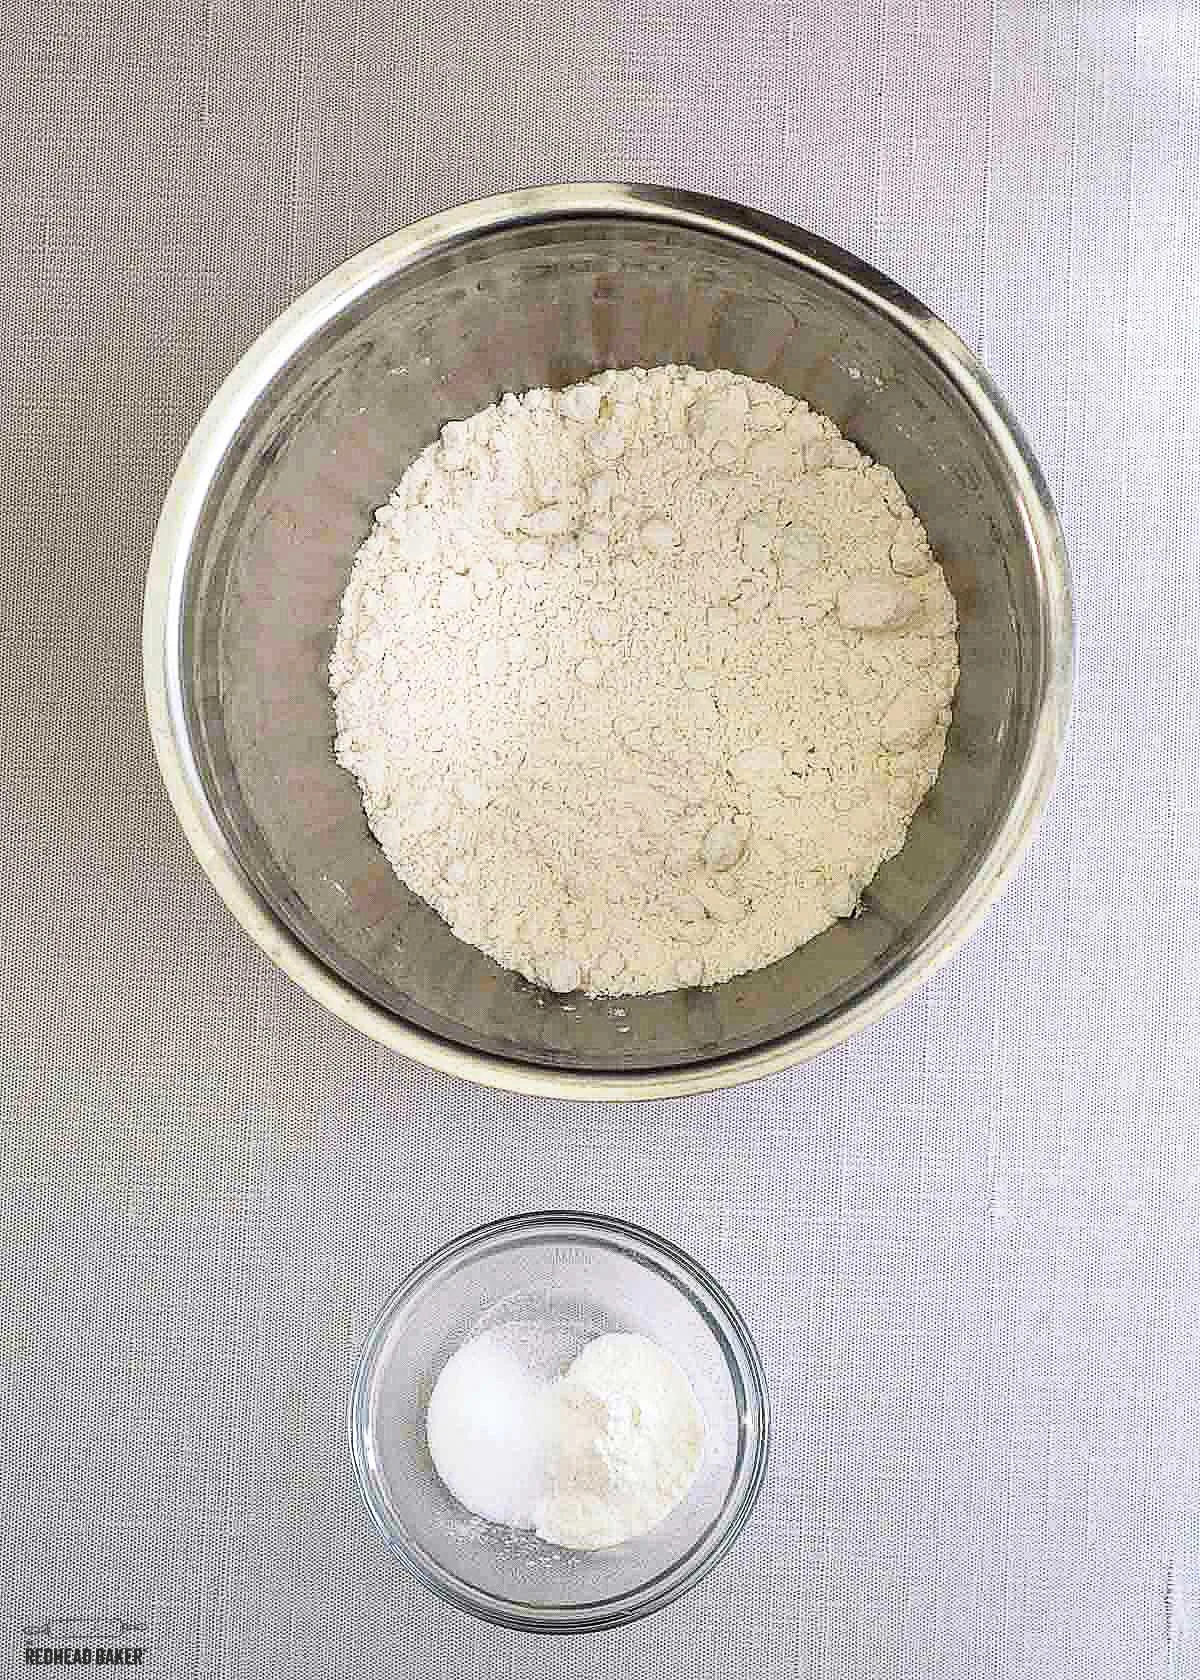 Dry ingredients for hte donuts: flour, baking powder and salt. 